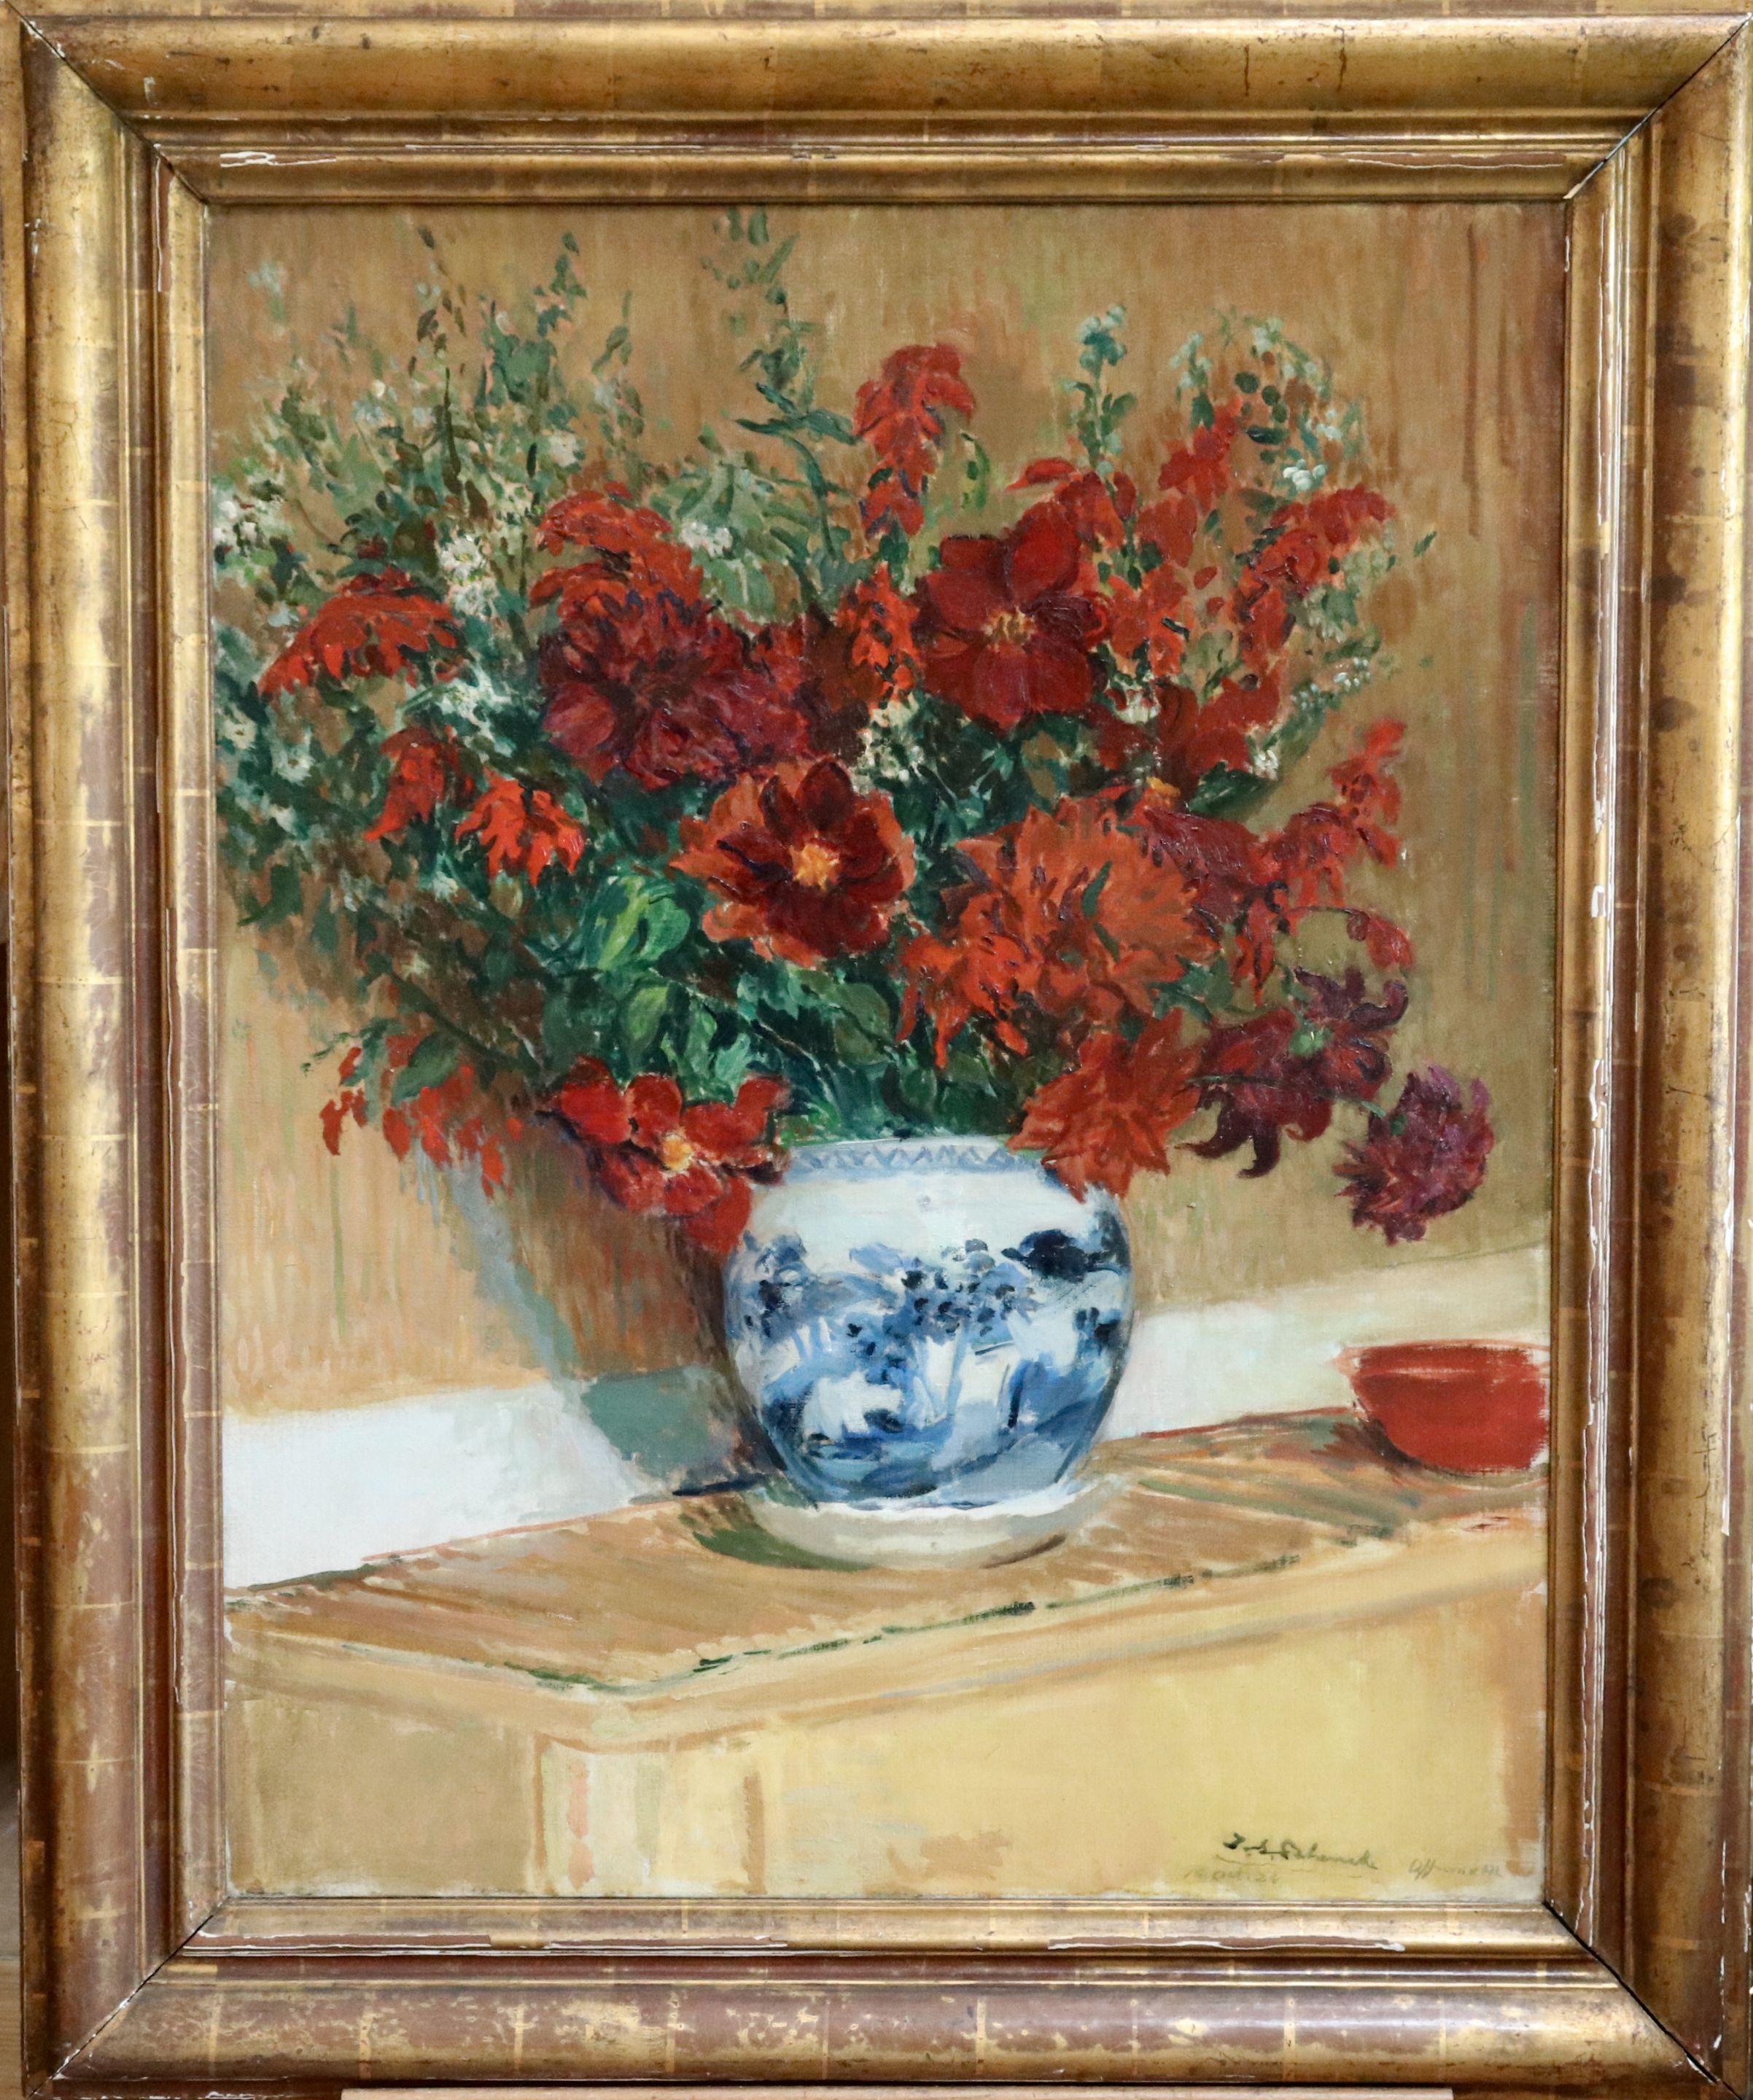 Flowers - 19th Century Oil, Still Life Vase Red Flowers by Jacques-Emile Blanche - Painting by Jacques Emile Blanche